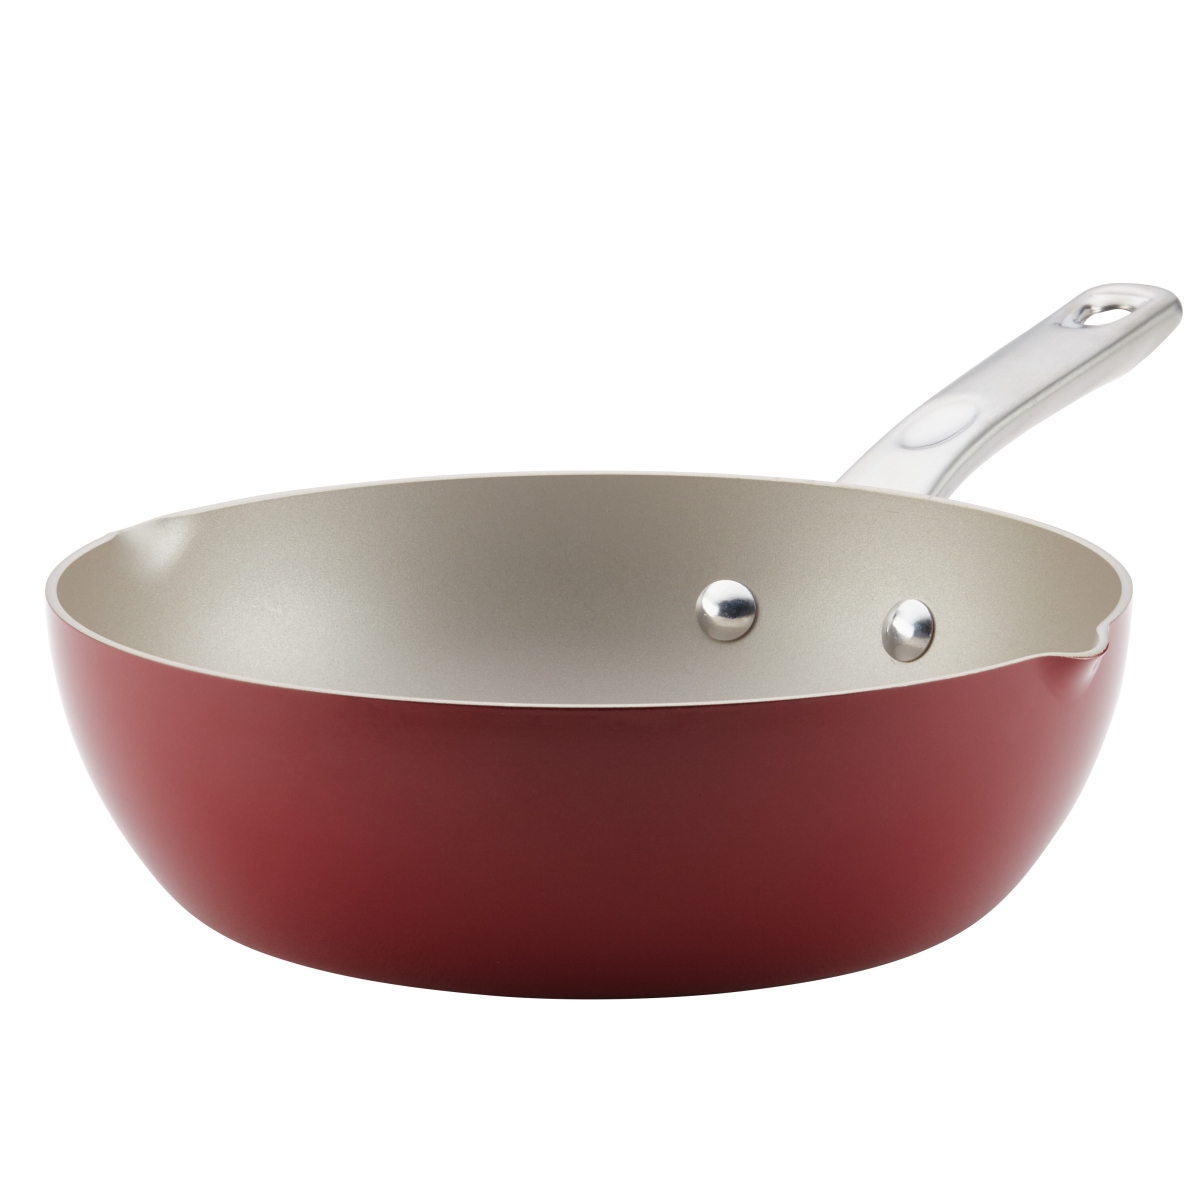 10742 Porcelain Enamel Nonstick Chef Pan With Pour Spouts, 9.75 In. - Sienna Red